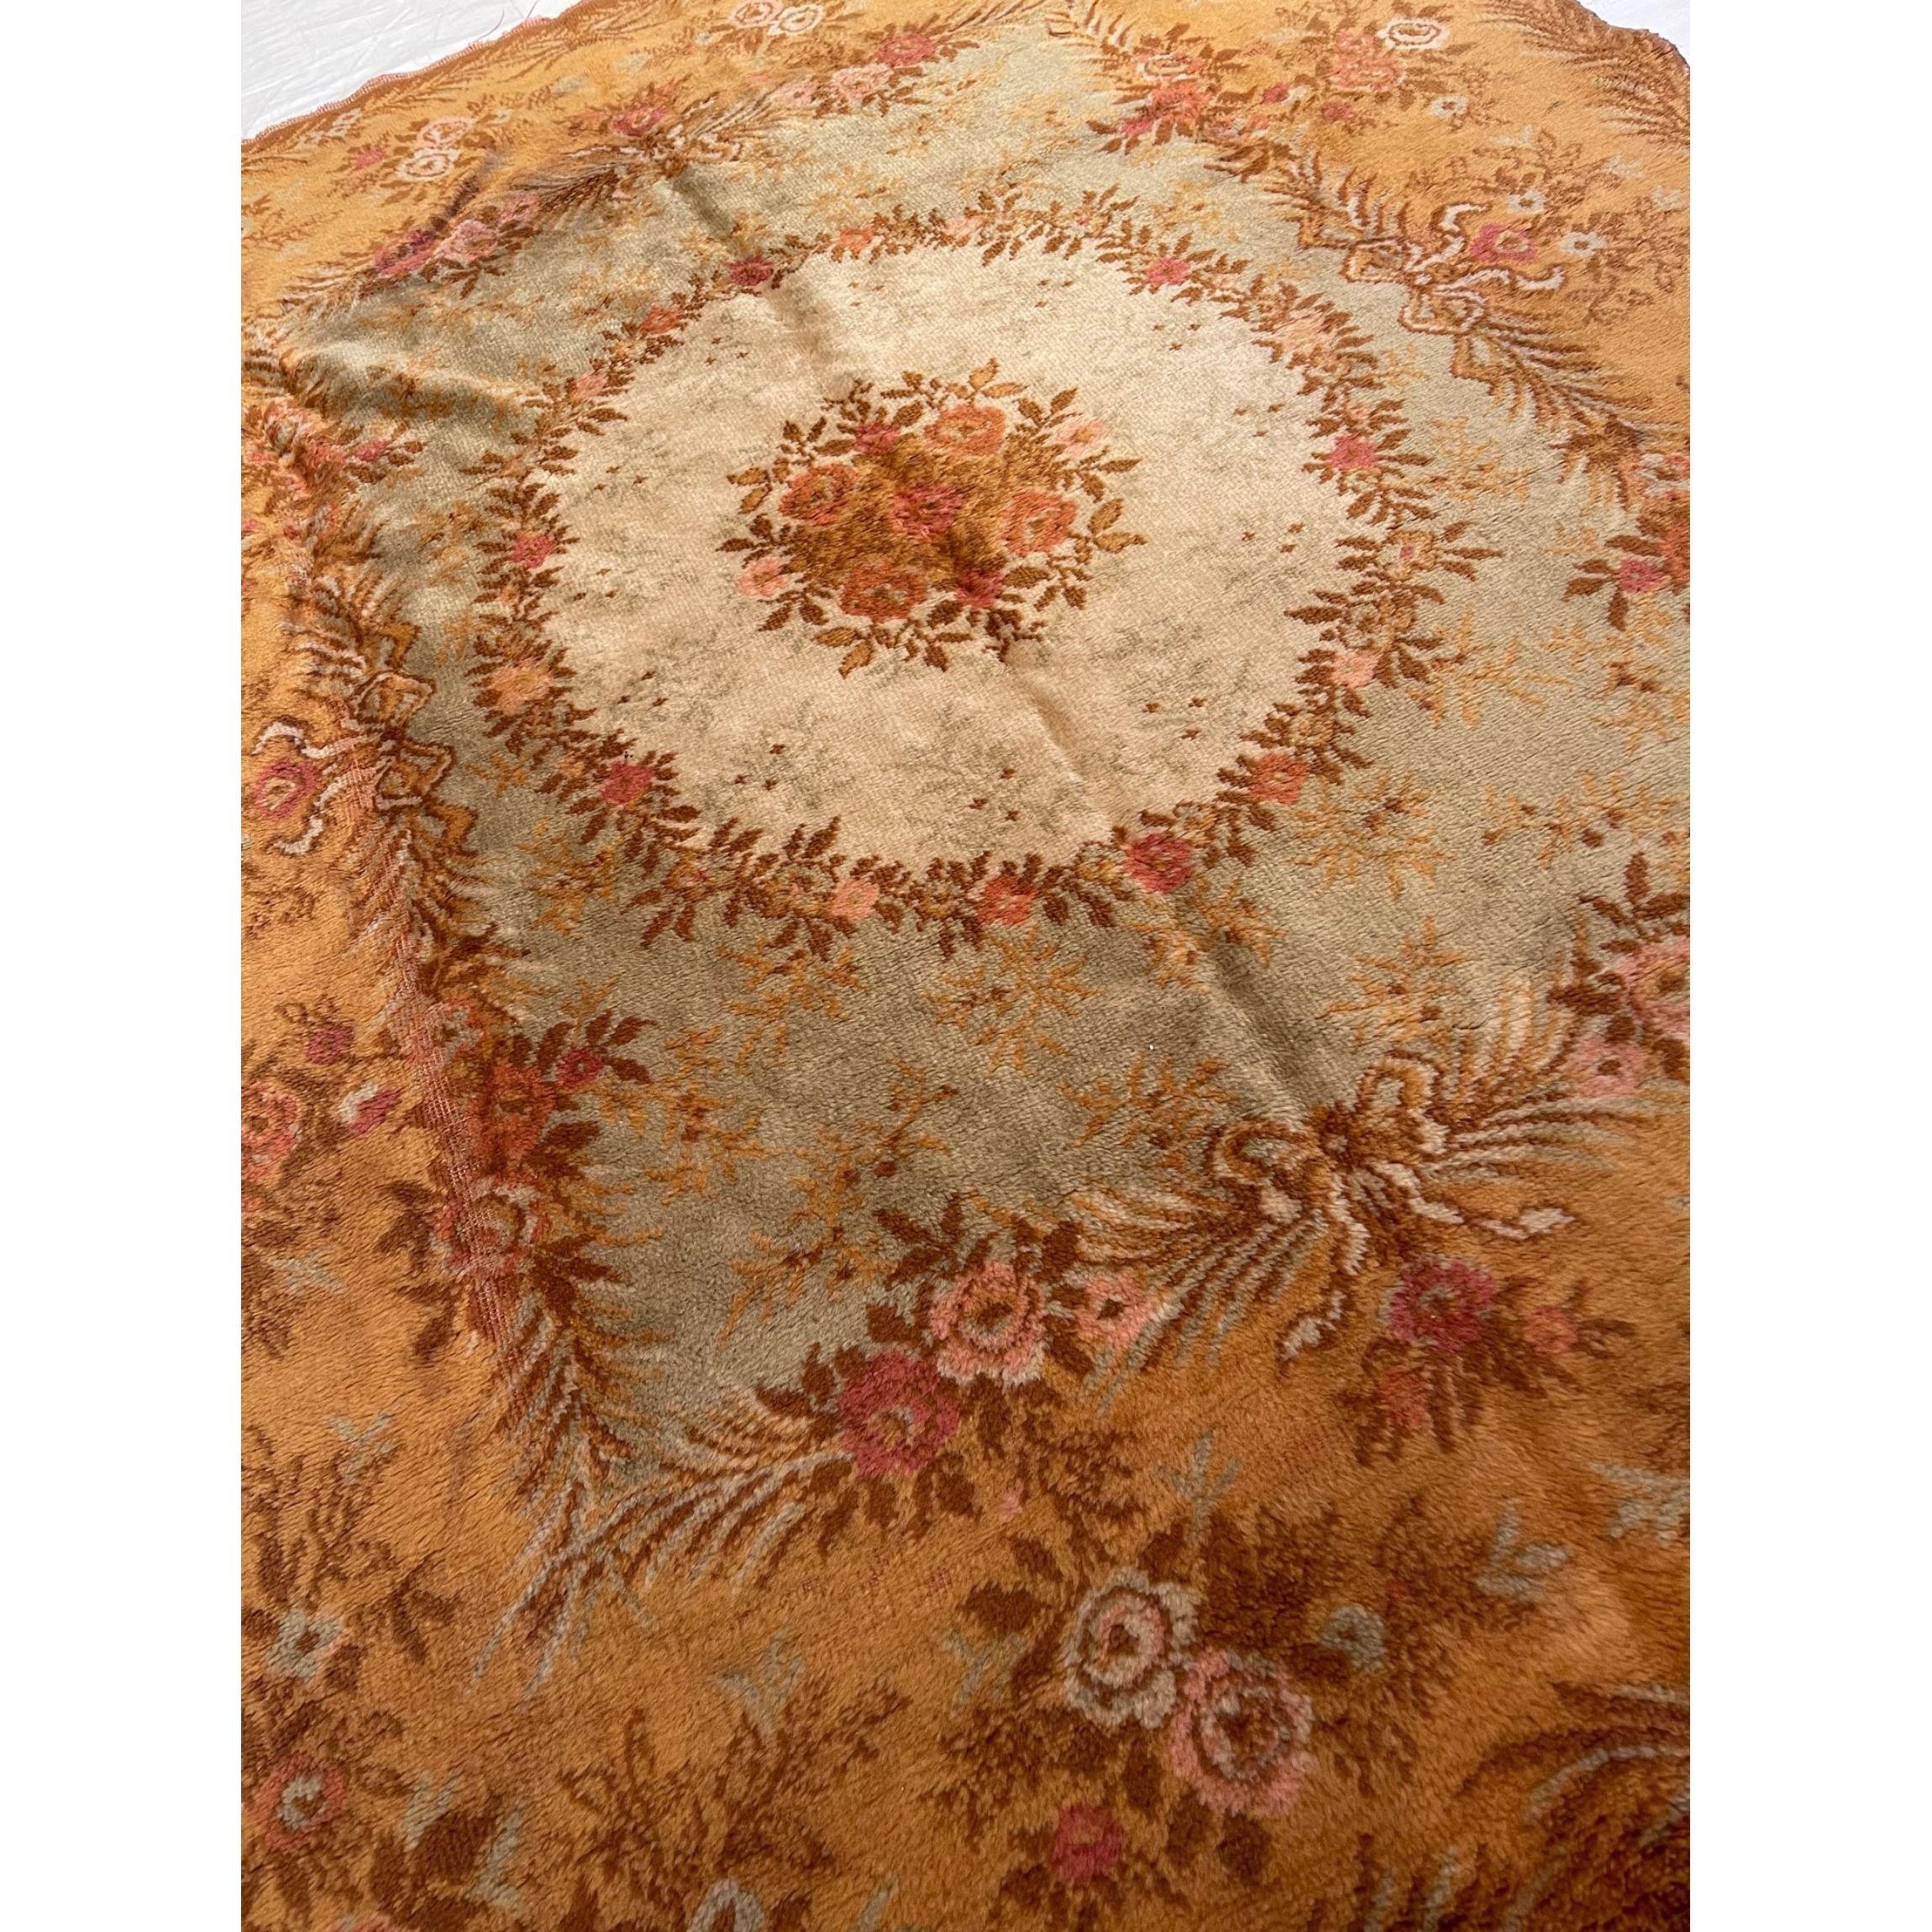 Mid-19th Century European Aubusson Style Rug 5'7'' x 4'5'' , handmade and hand-knotted, empire traditional style